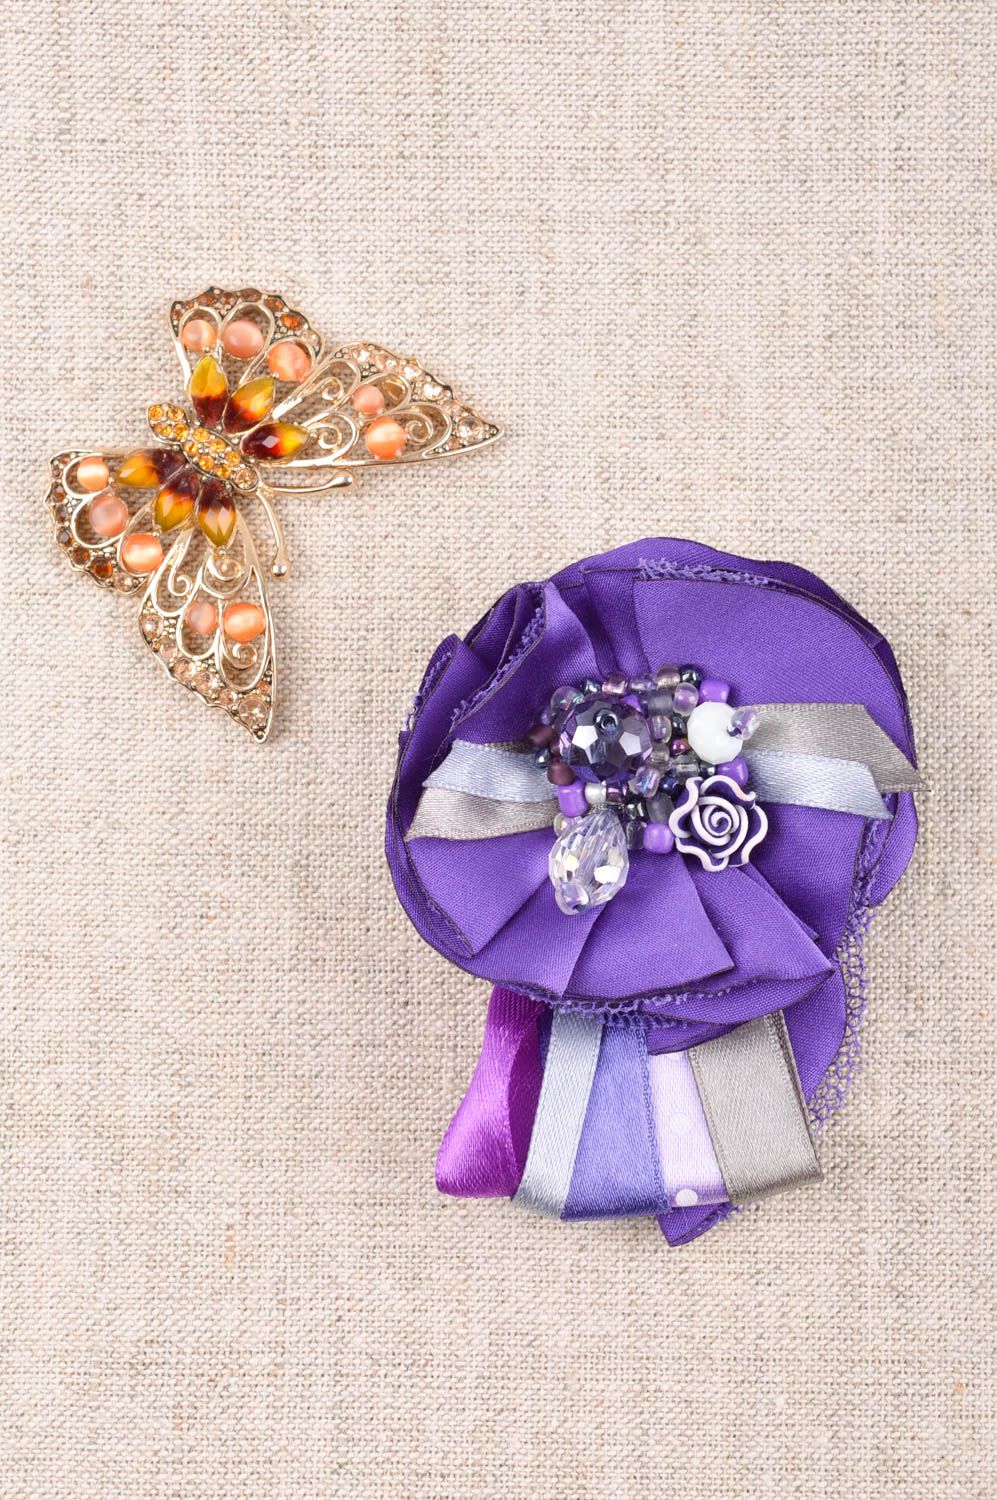 Brooch jewelry handcrafted jewelry fashion accessories flower brooch gift ideas photo 1